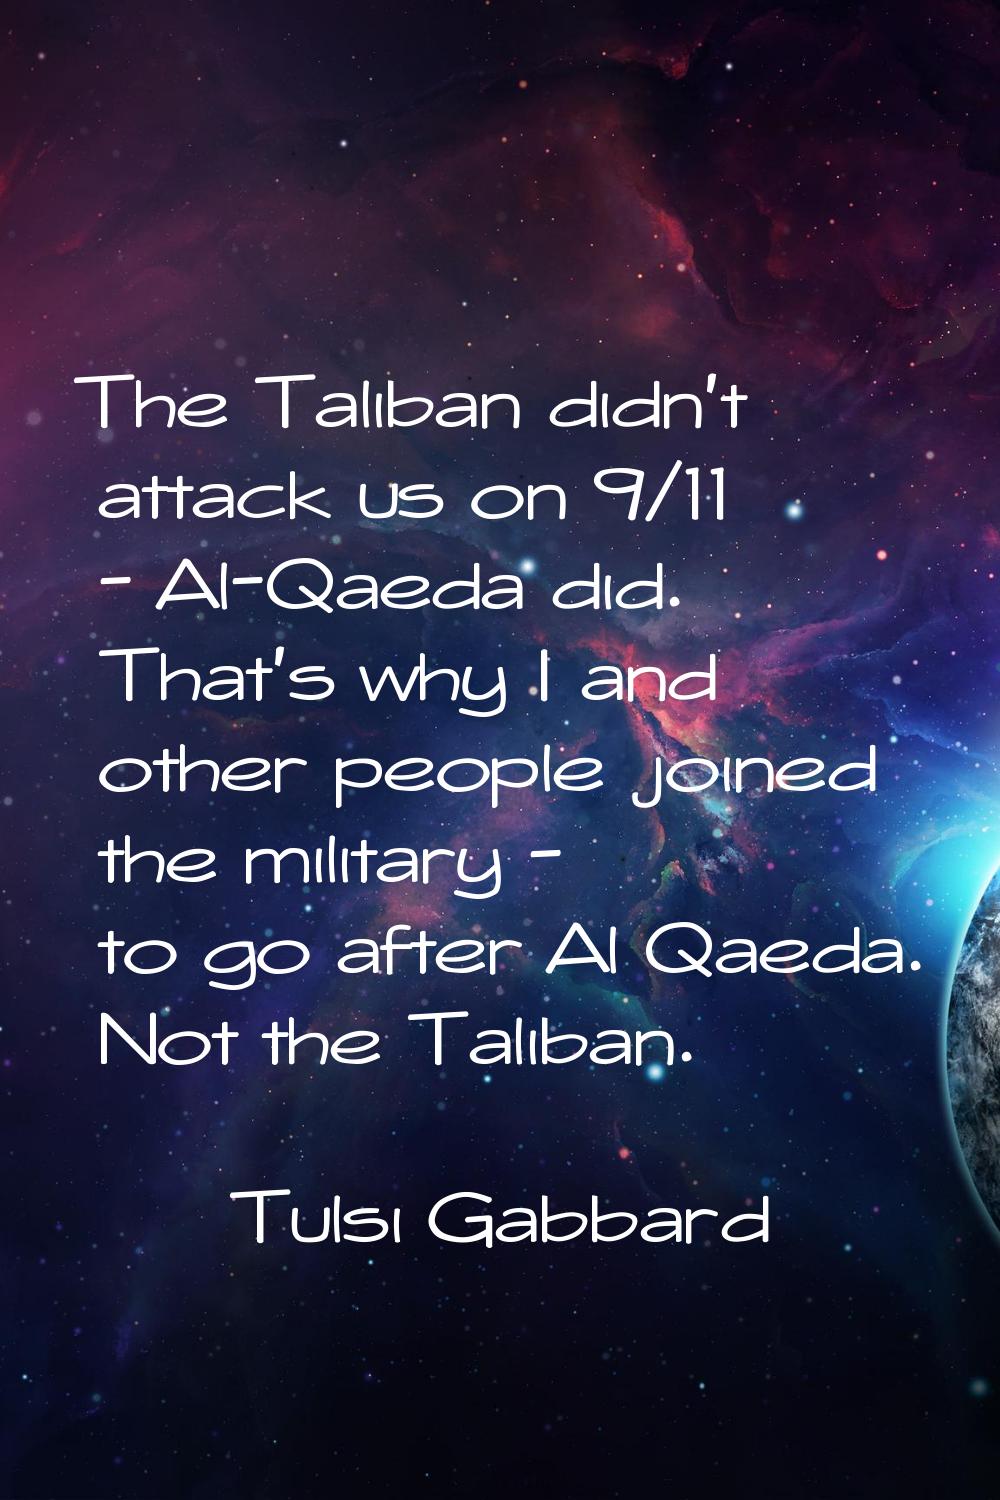 The Taliban didn't attack us on 9/11 - Al-Qaeda did. That's why I and other people joined the milit